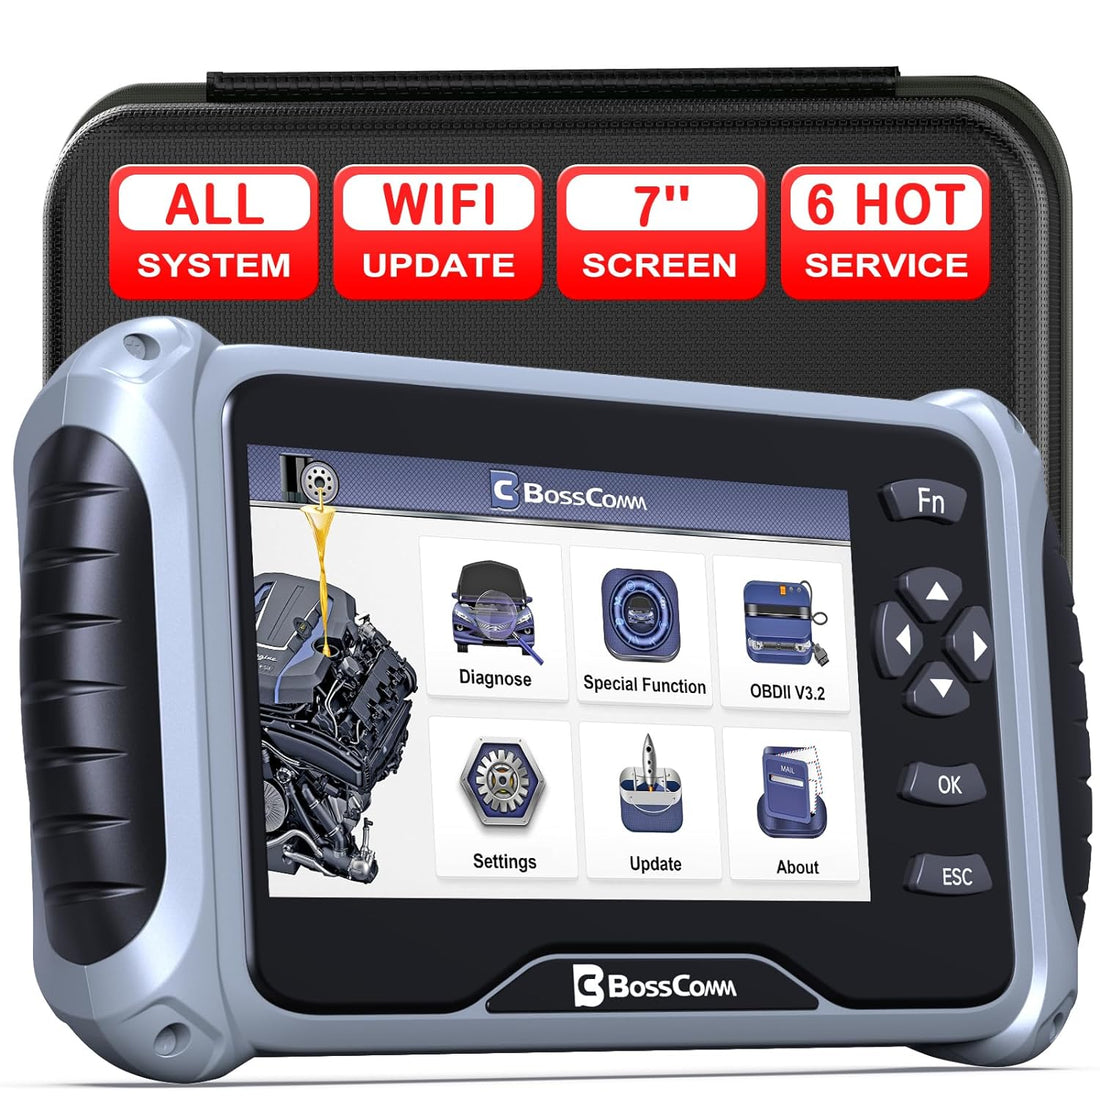 BOSSCOMM IF745 OBD2 Scanner Code Reader, All System Car Diagnostics with ABS Brake Bleed/BMS/Oil Reset/Throttle Relearn/SAS/EPB, Scan Tool with 7" Screen, Lifetime WiFi Update